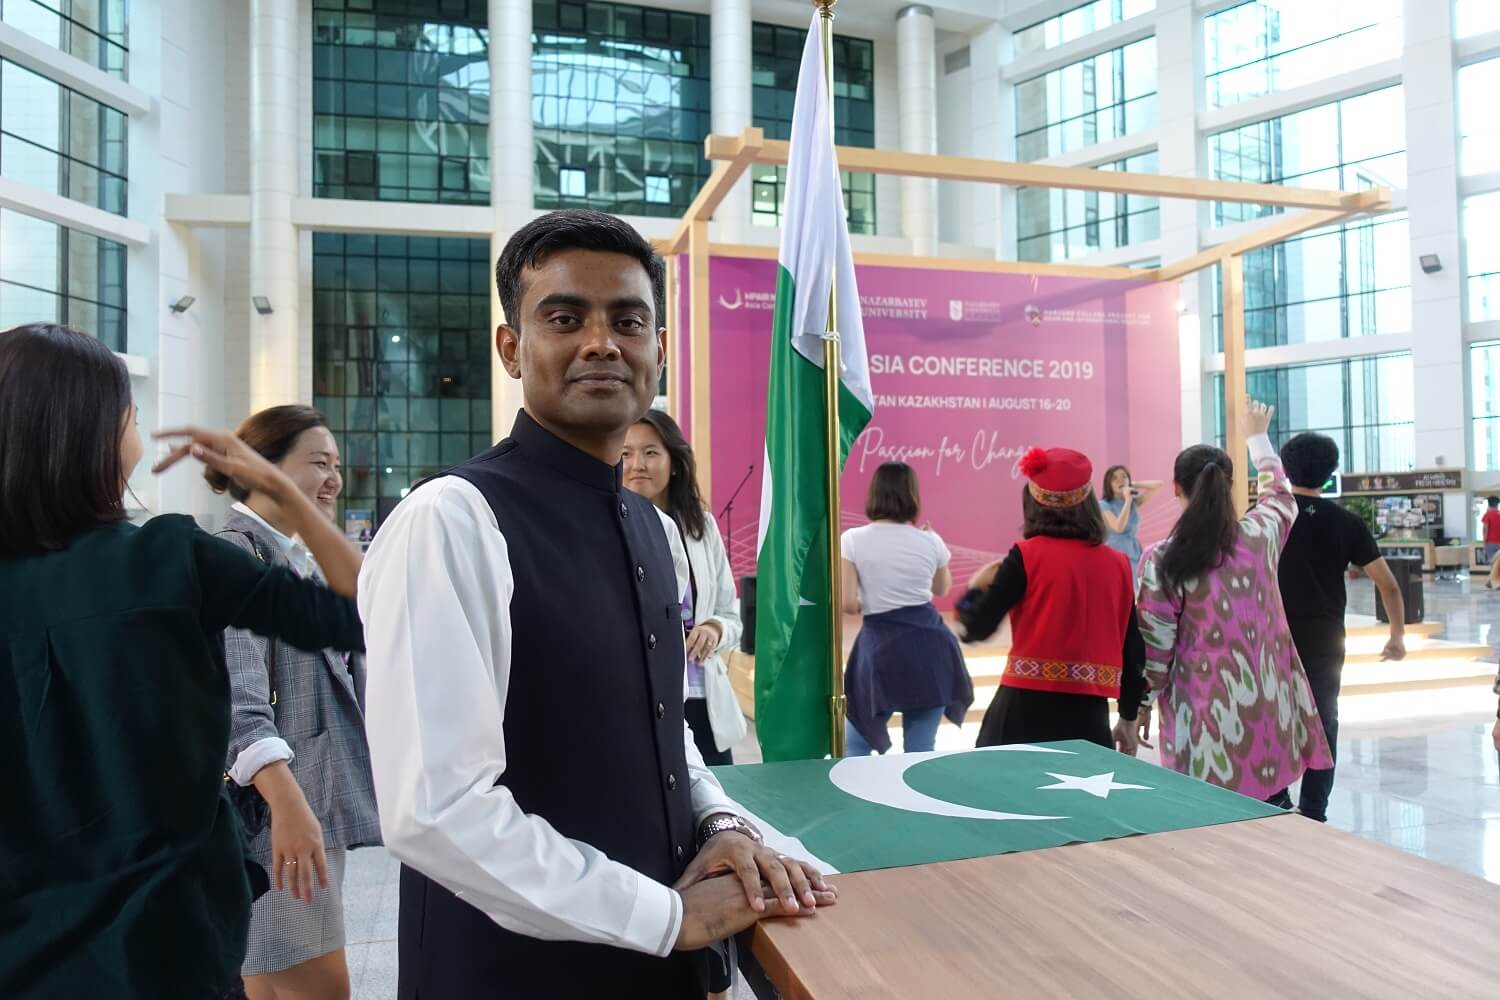 'Bigger picture': Why this Pakistani chose to study political science in Kazakhstan